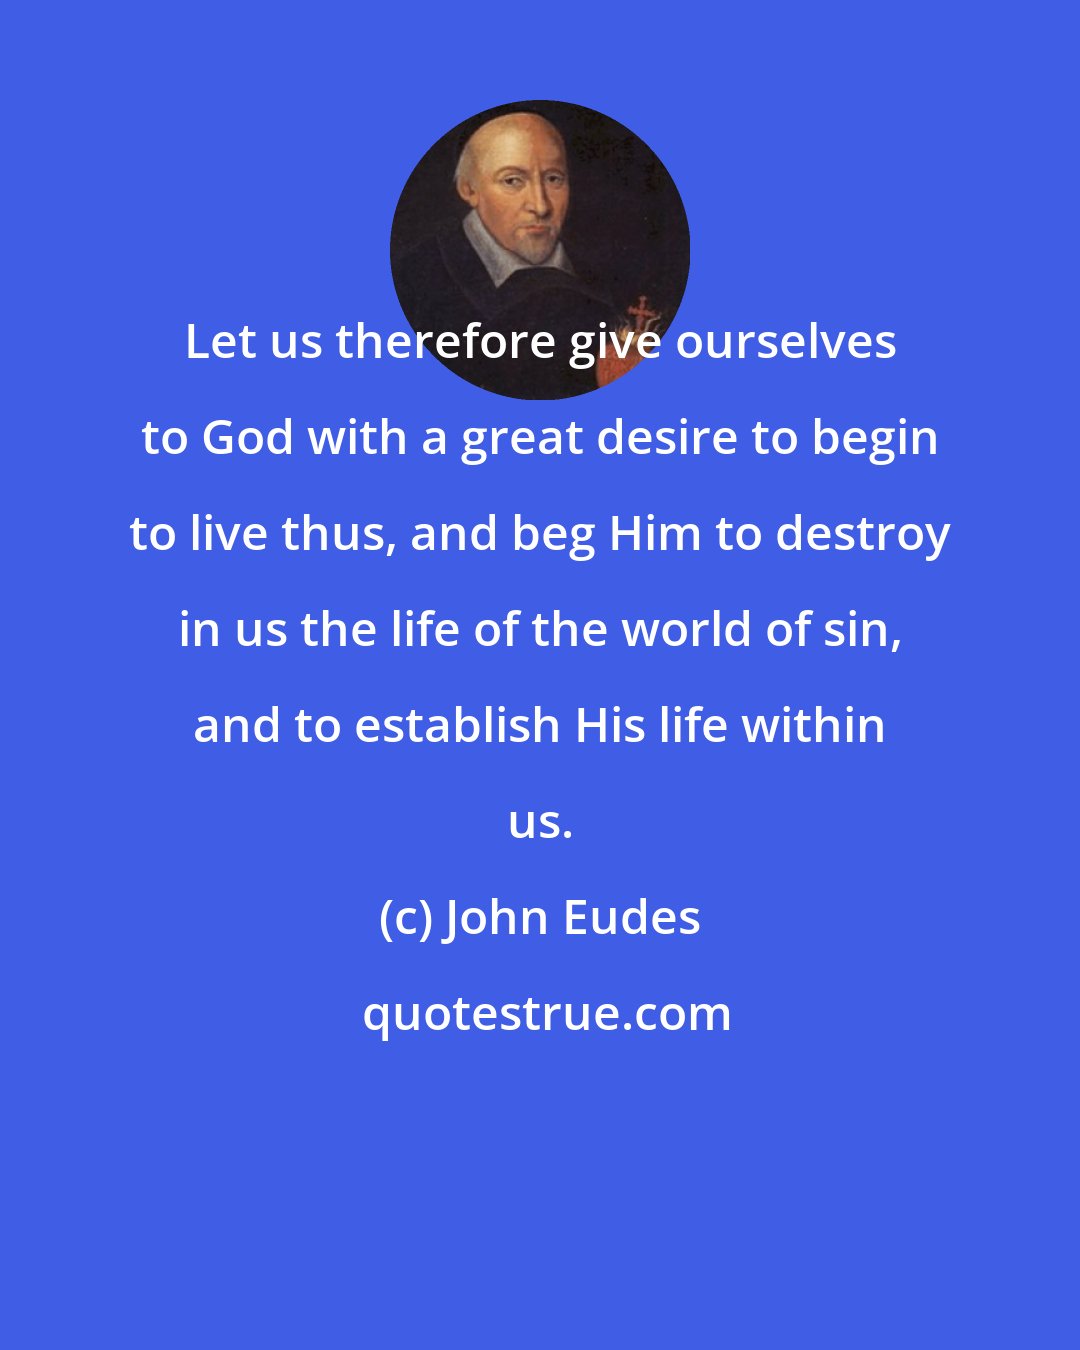 John Eudes: Let us therefore give ourselves to God with a great desire to begin to live thus, and beg Him to destroy in us the life of the world of sin, and to establish His life within us.